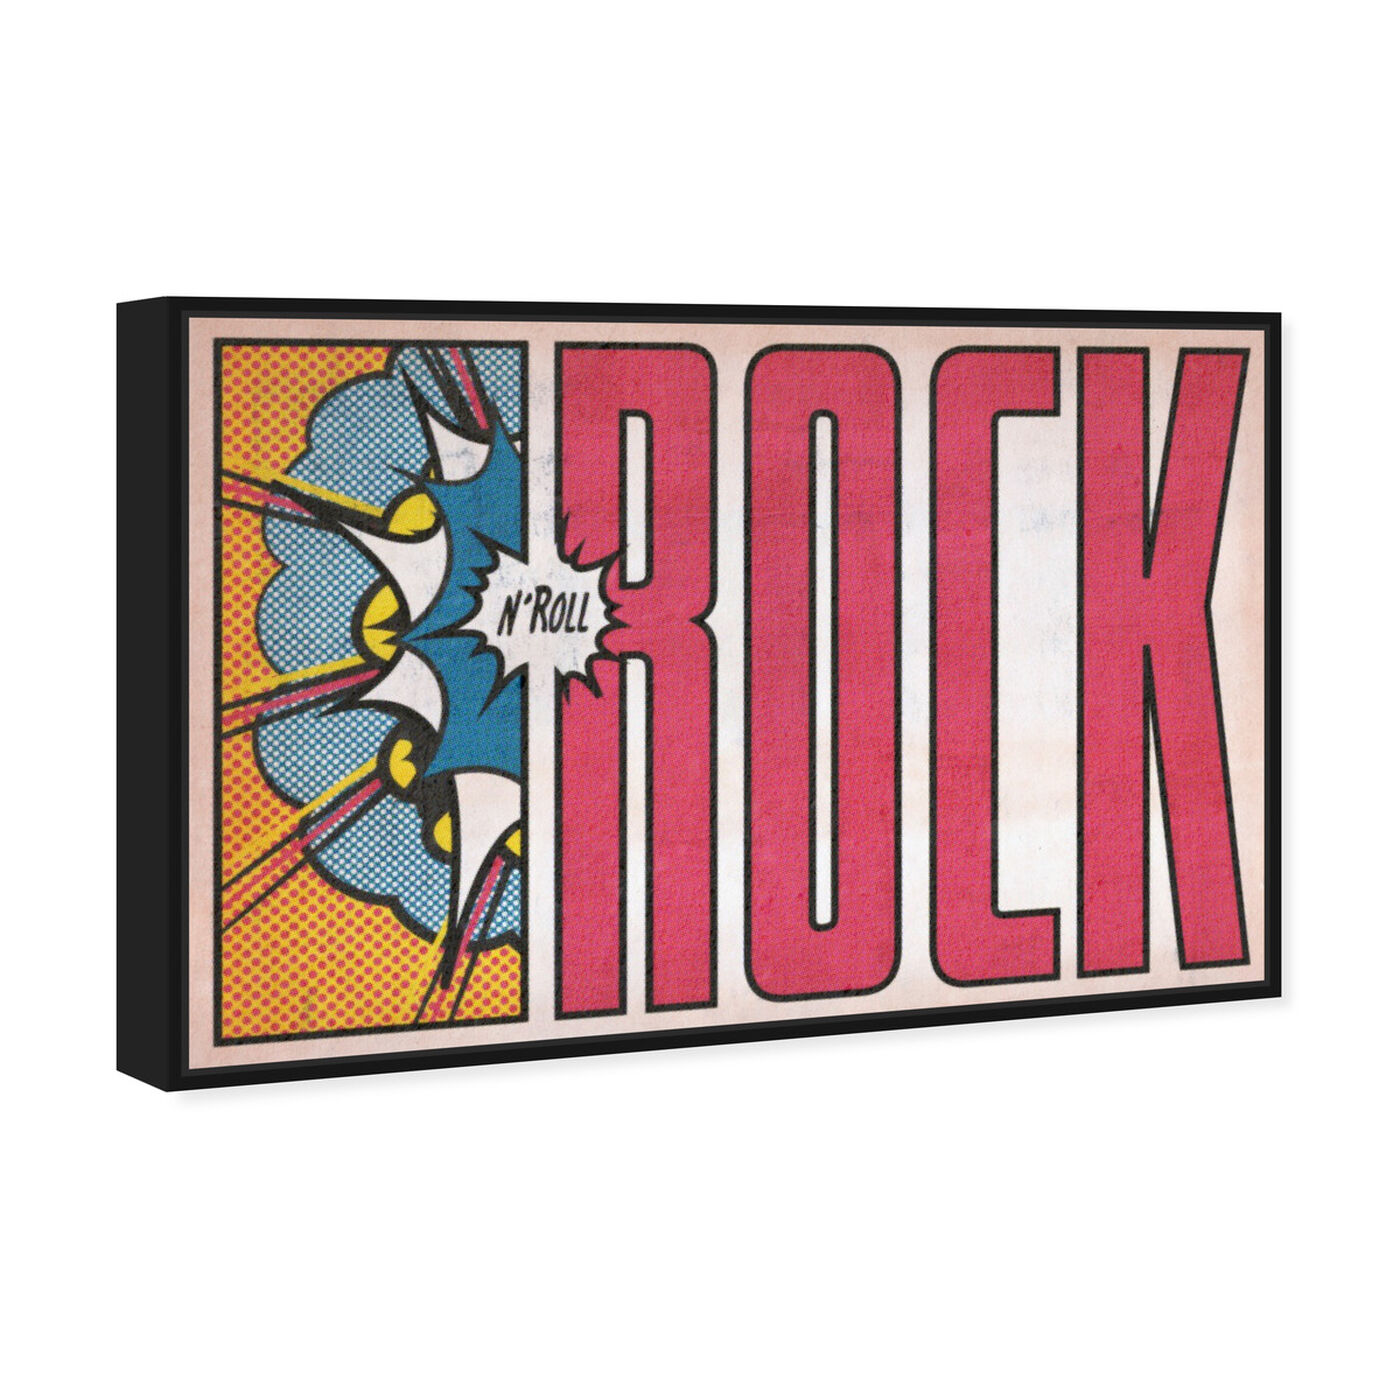 Angled view of Rock N' Roll featuring advertising and comics art.